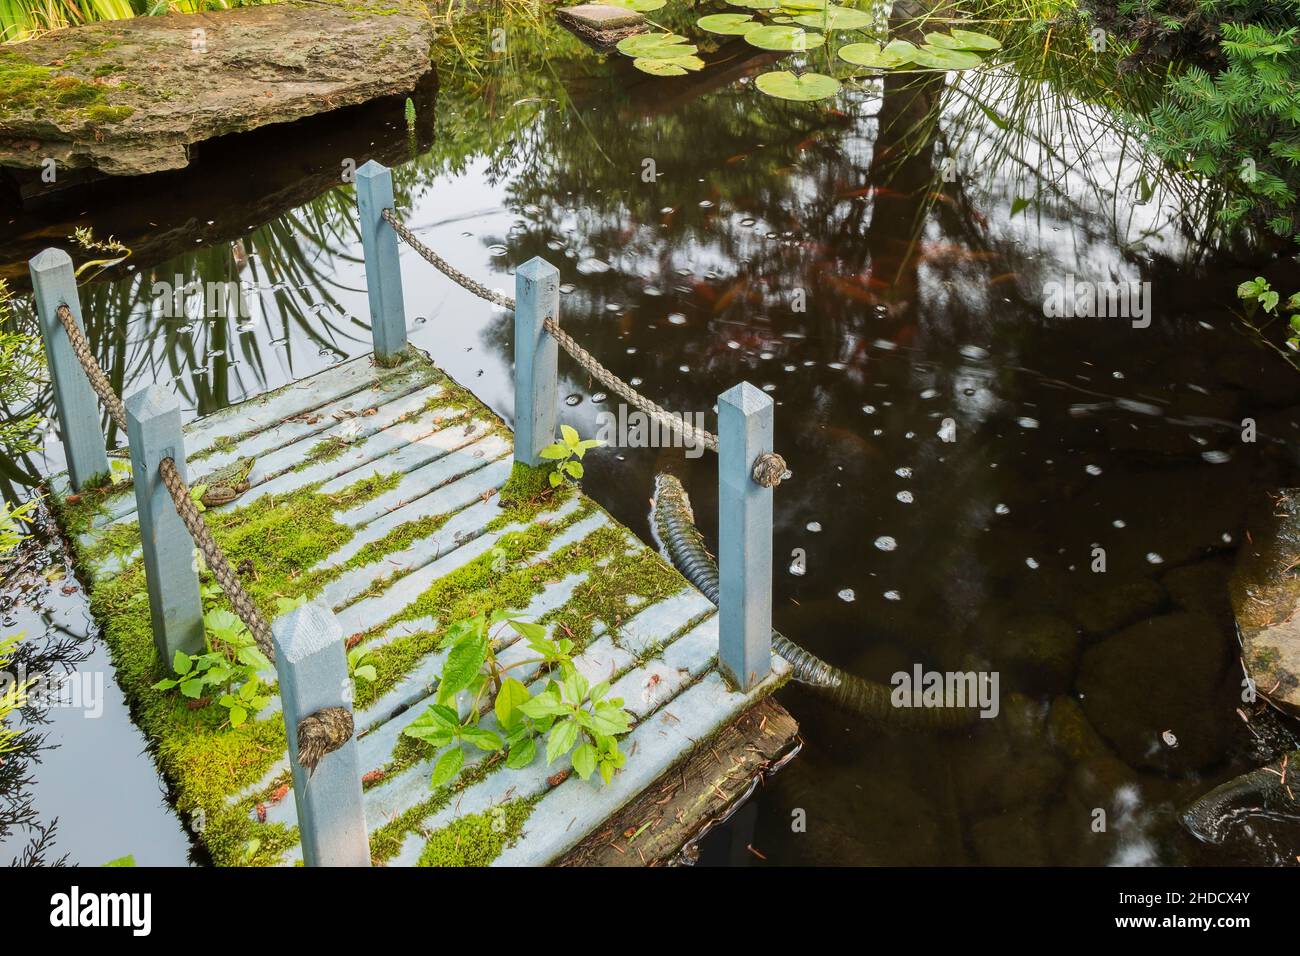 Rana clamitans - Green Frog on blue painted miniature wooden footbridge floating in pond with Nymphaea - Waterlilly pads in front yard garden. Stock Photo